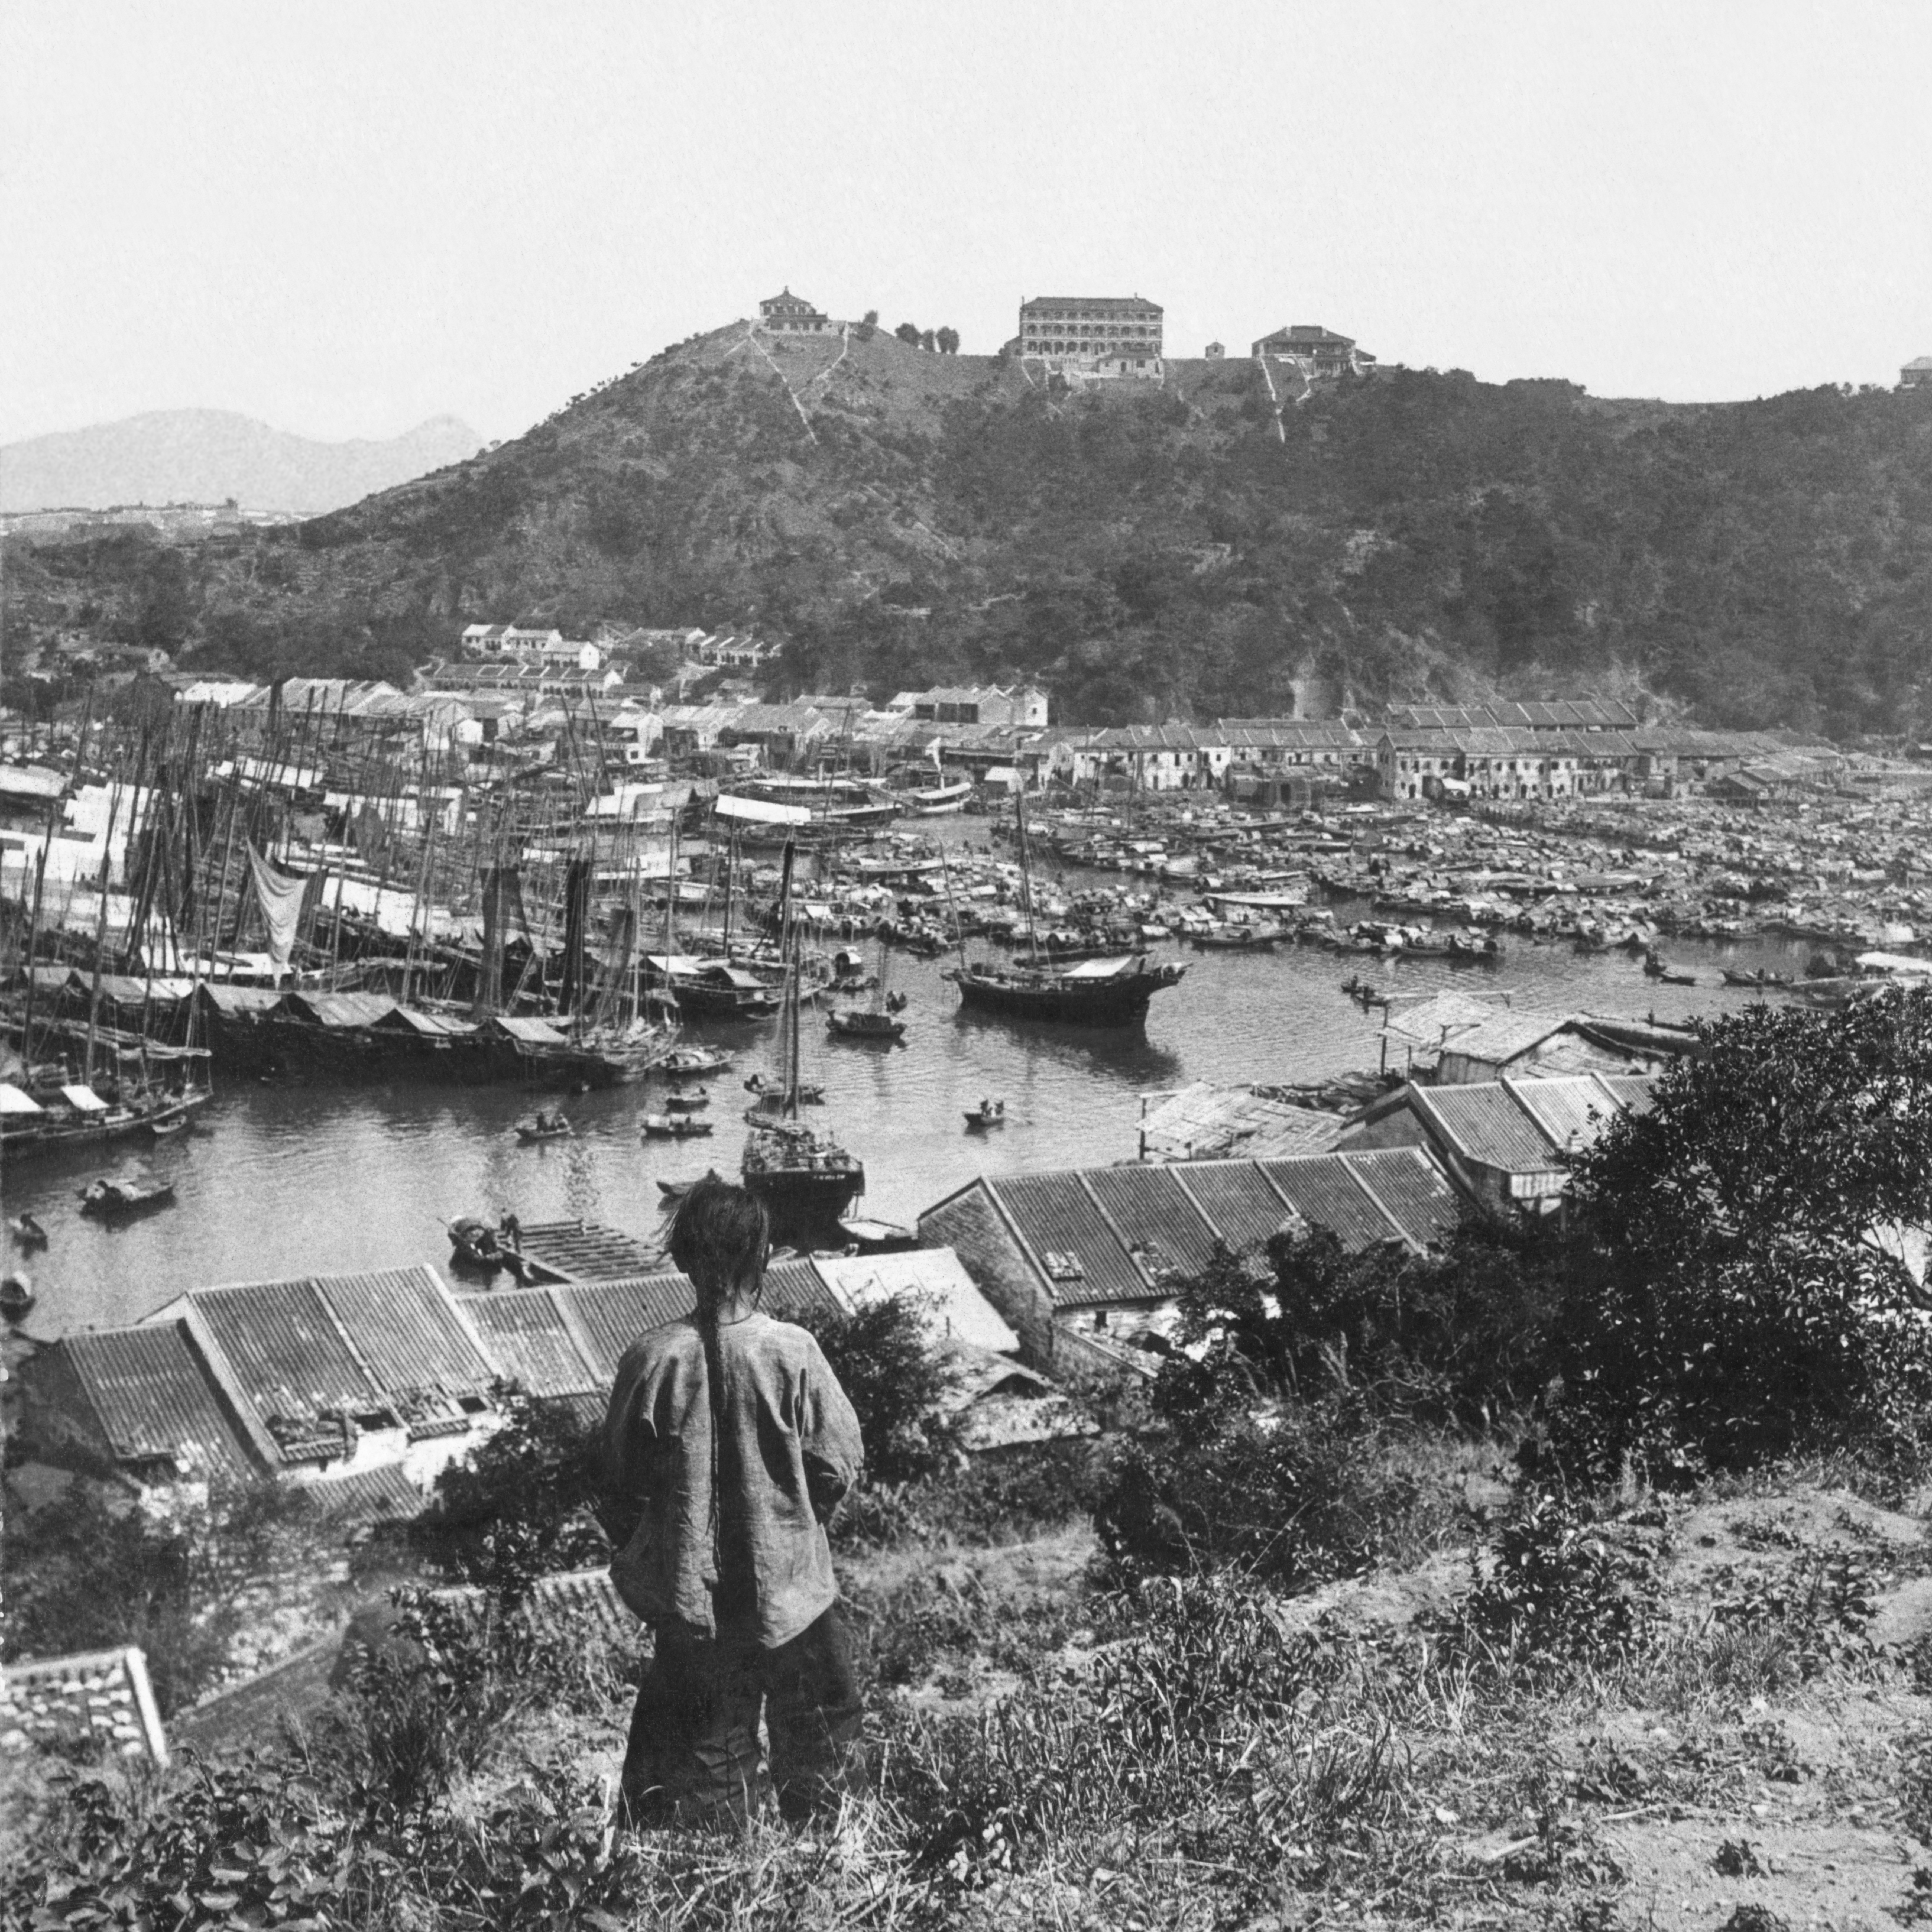 Aldrich Bay, more commonly known today as Shau Kei Wan, on the north side of Hong Kong Island in 1902. It is just one image from David Bellis’ new book Old Hong Kong Photos and The Tales They Tell, Volume 3. Photo: Gwulo